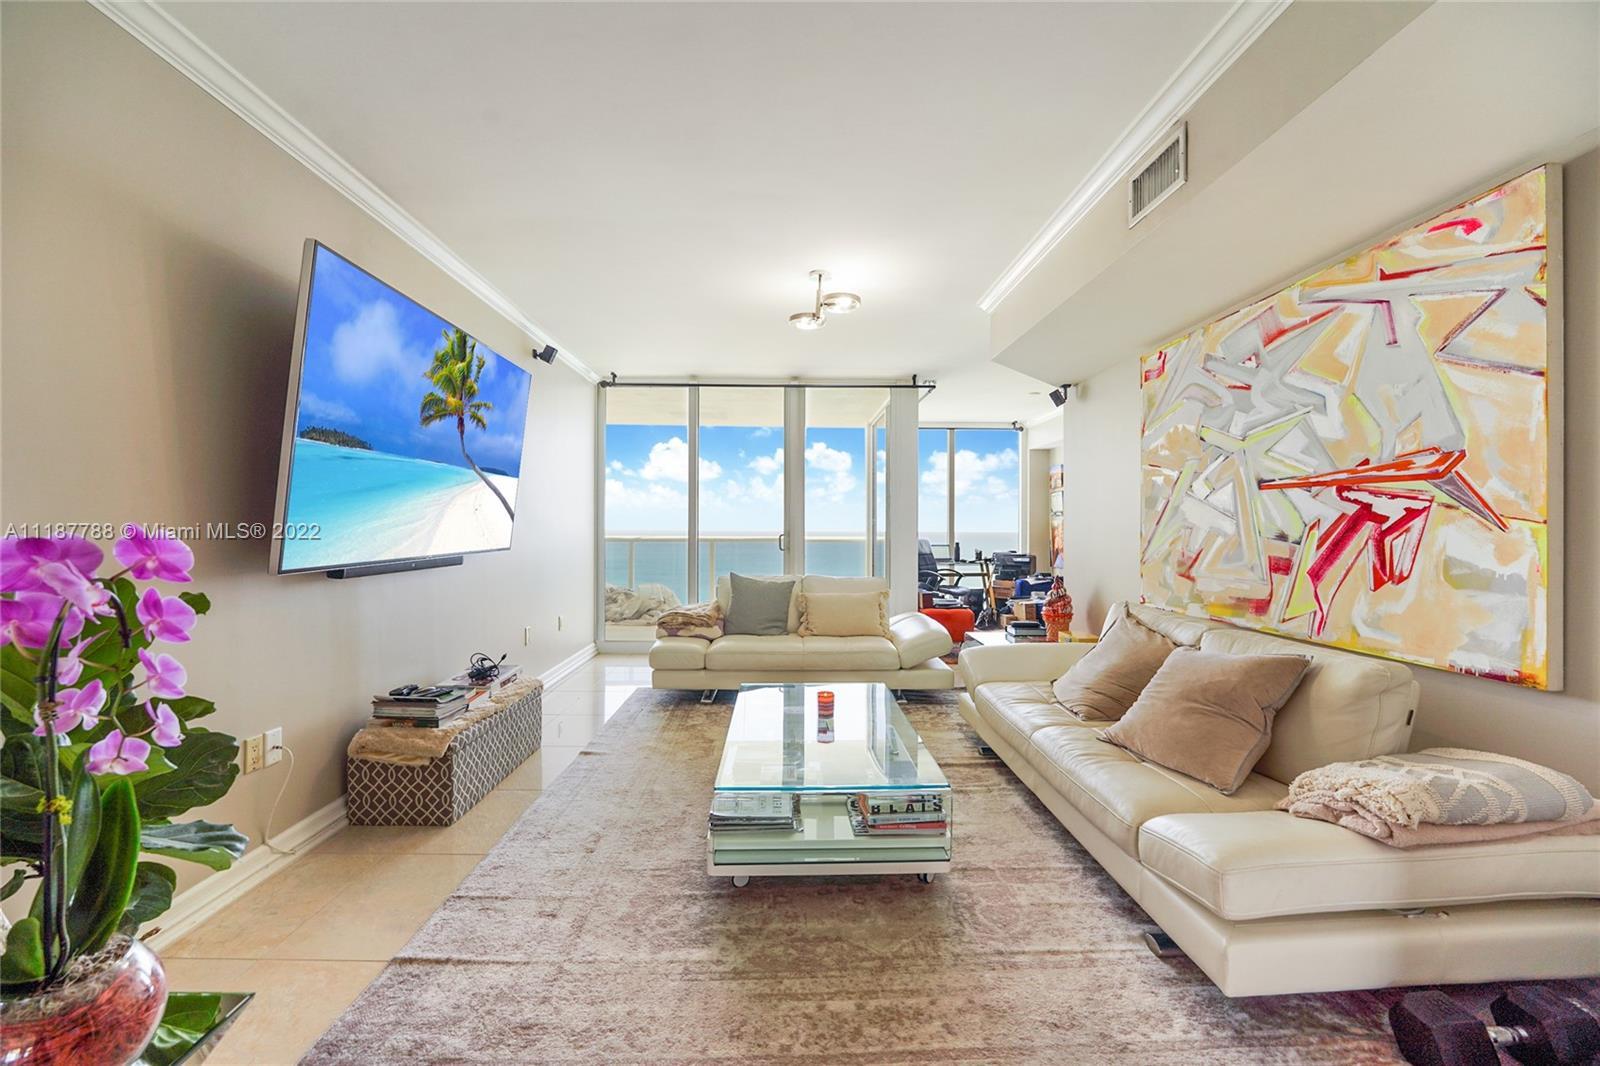 Ocean Two Condo in Sunny Isles Beach offering 2 Bedrooms and 2.5 bathrooms plus den with stunning Di